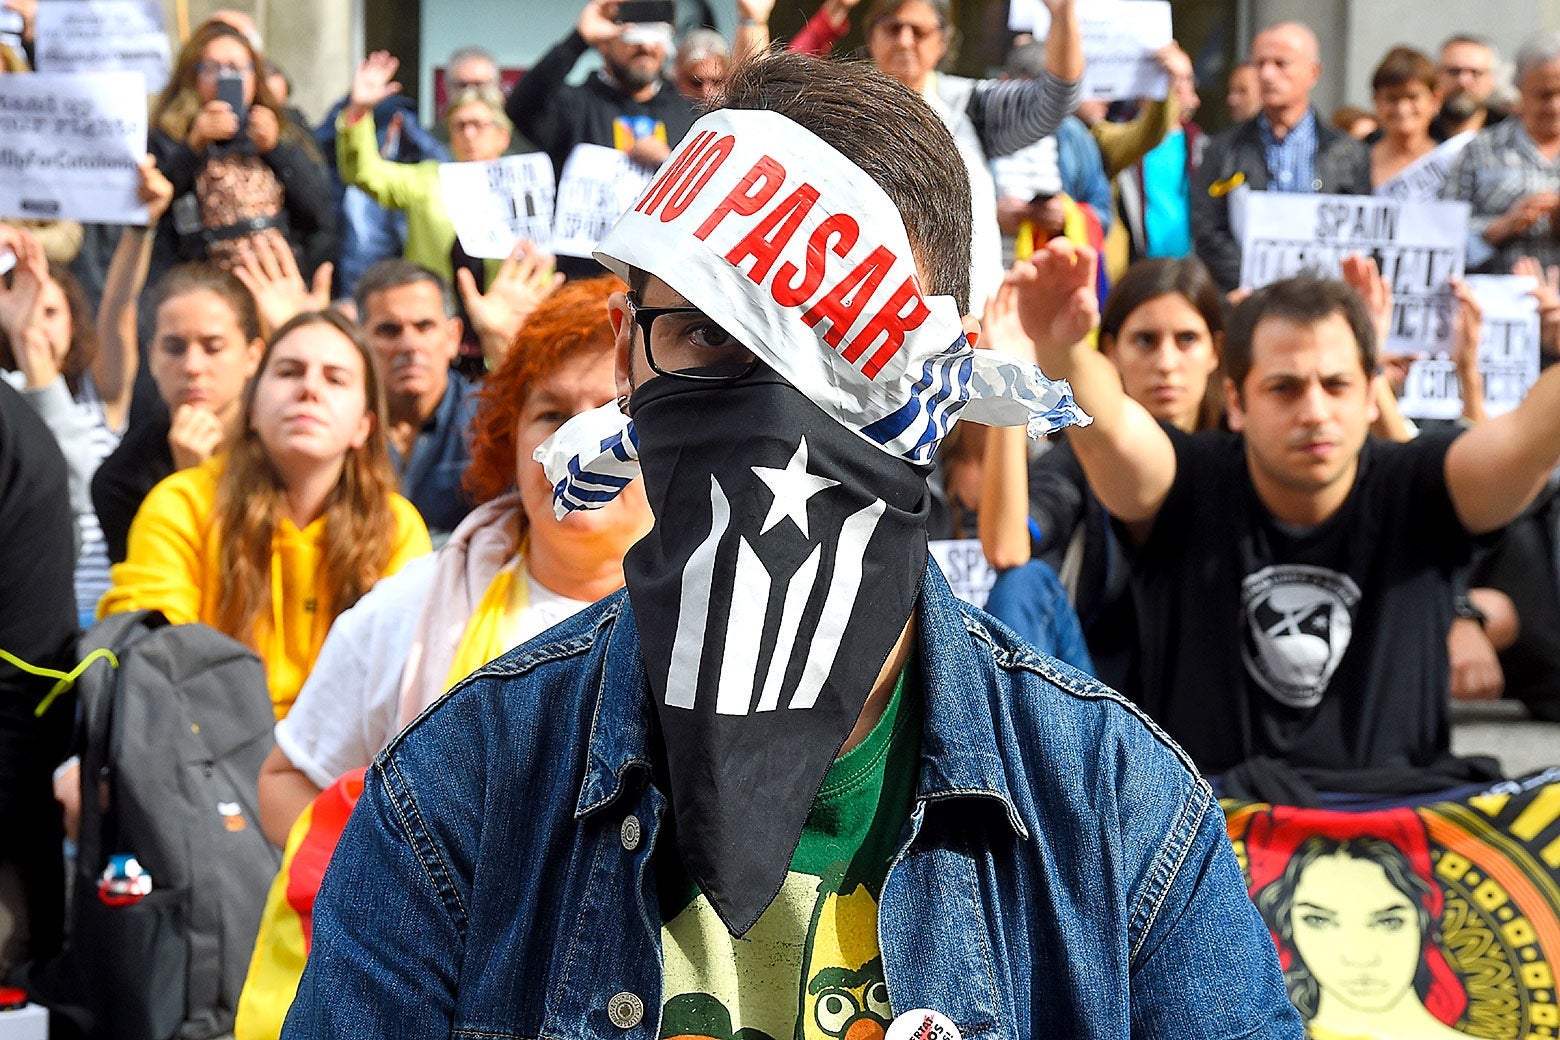 A masked demonstrator in Barcelona on Wednesday.